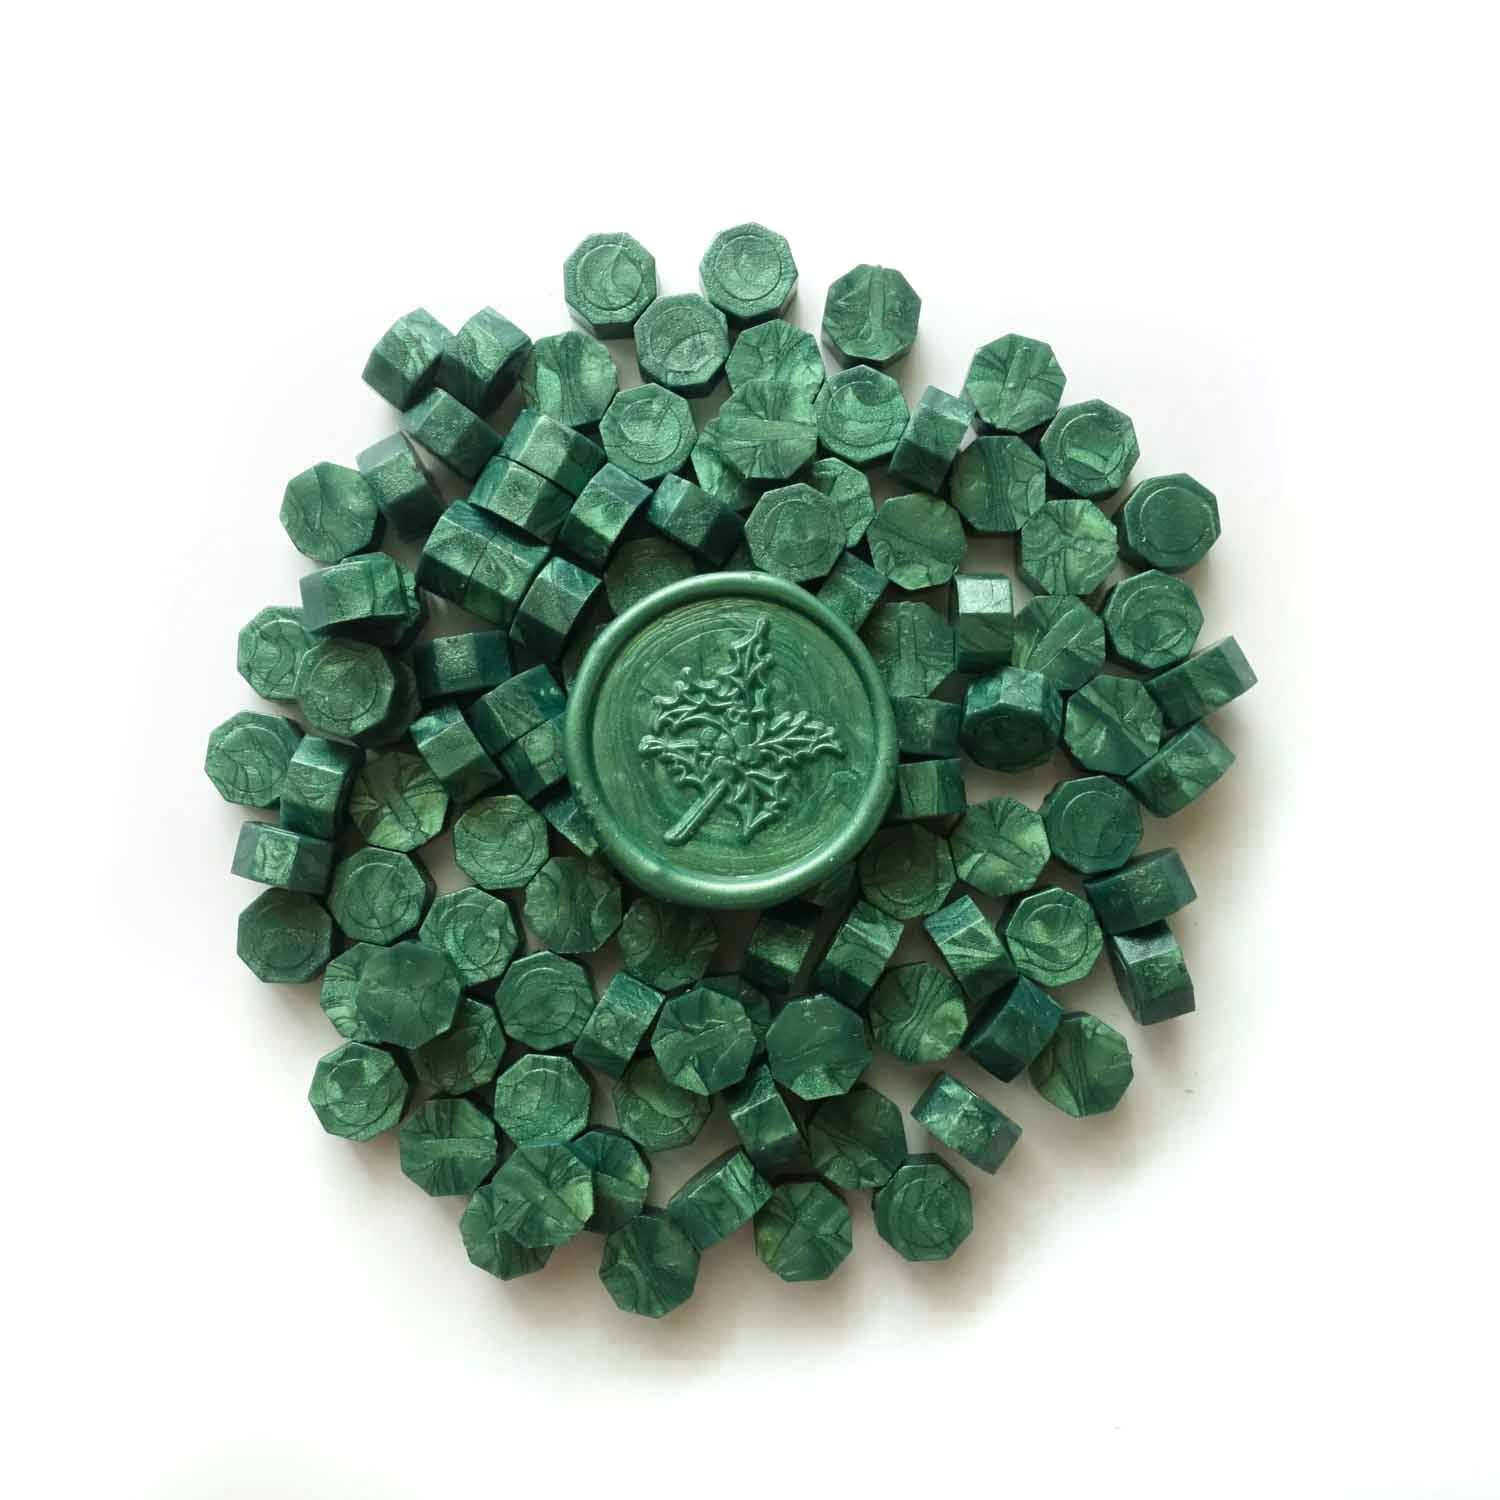 Forest green sealing wax granules with holly wax seal Australia